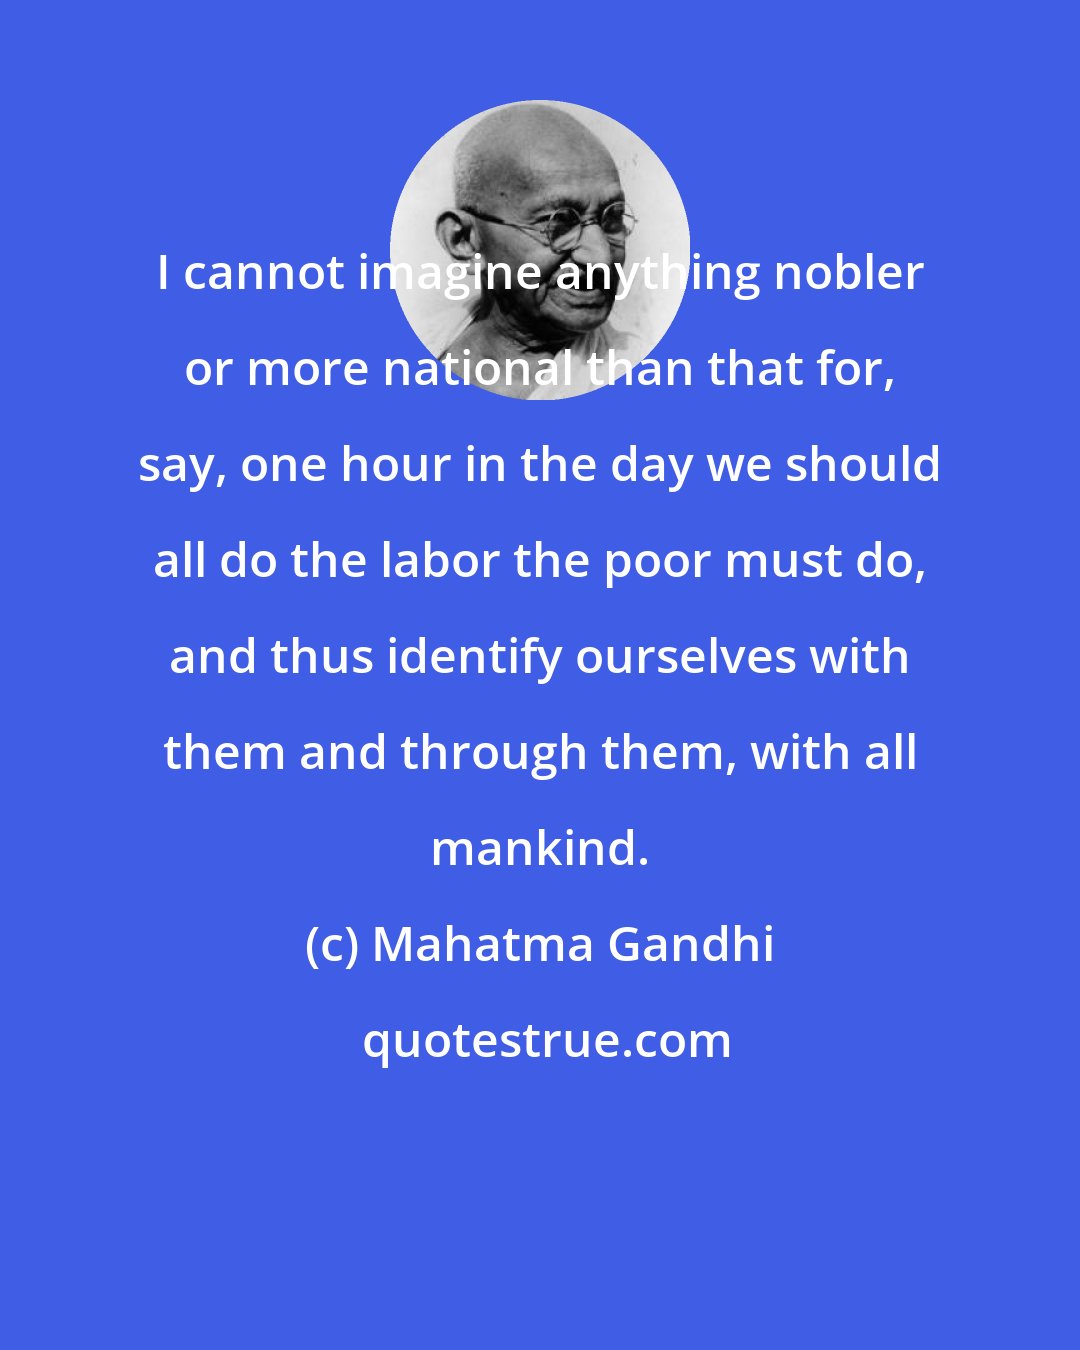 Mahatma Gandhi: I cannot imagine anything nobler or more national than that for, say, one hour in the day we should all do the labor the poor must do, and thus identify ourselves with them and through them, with all mankind.